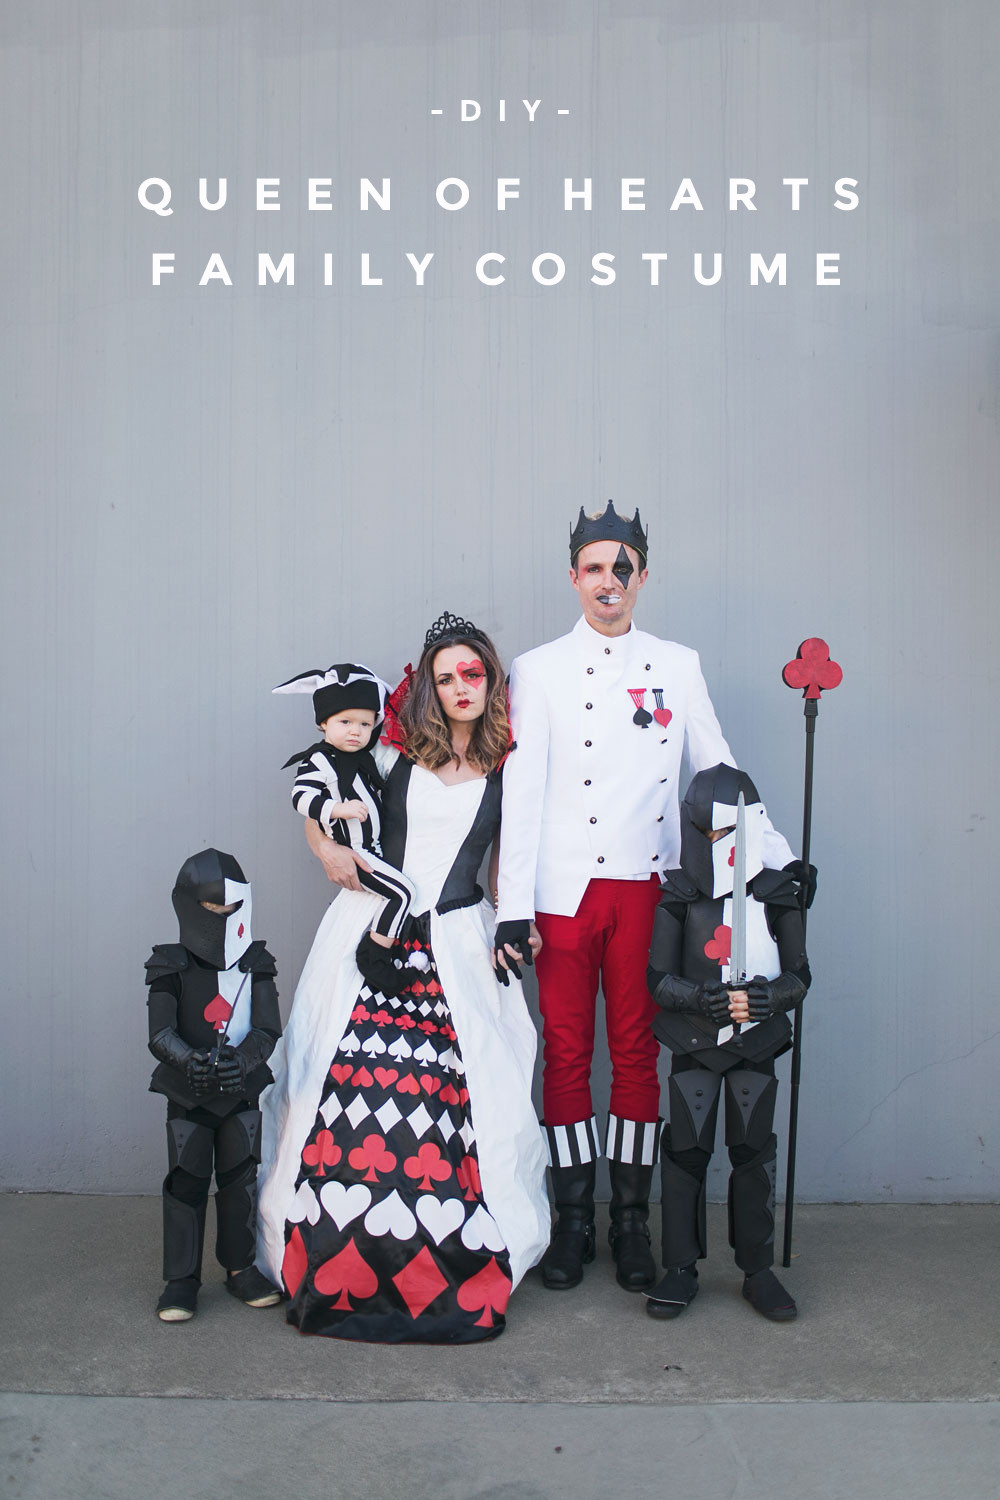 DIY Queen Of Hearts Costume
 DIY QUEEN OF HEARTS FAMILY COSTUME Tell Love and Party